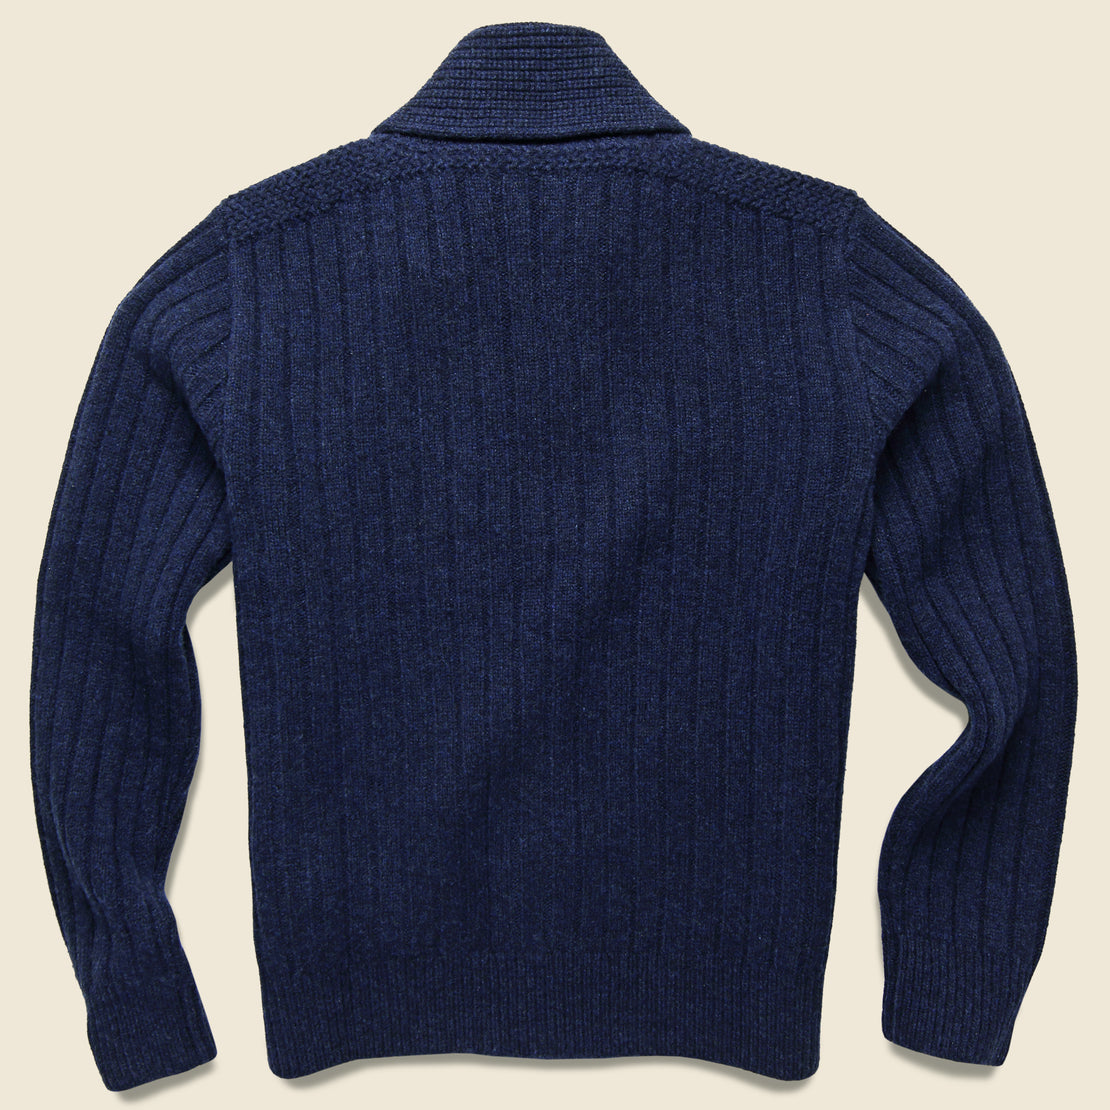 Cable-Rib Wool Cardigan - Navy Heather - RRL - STAG Provisions - Tops - Sweater